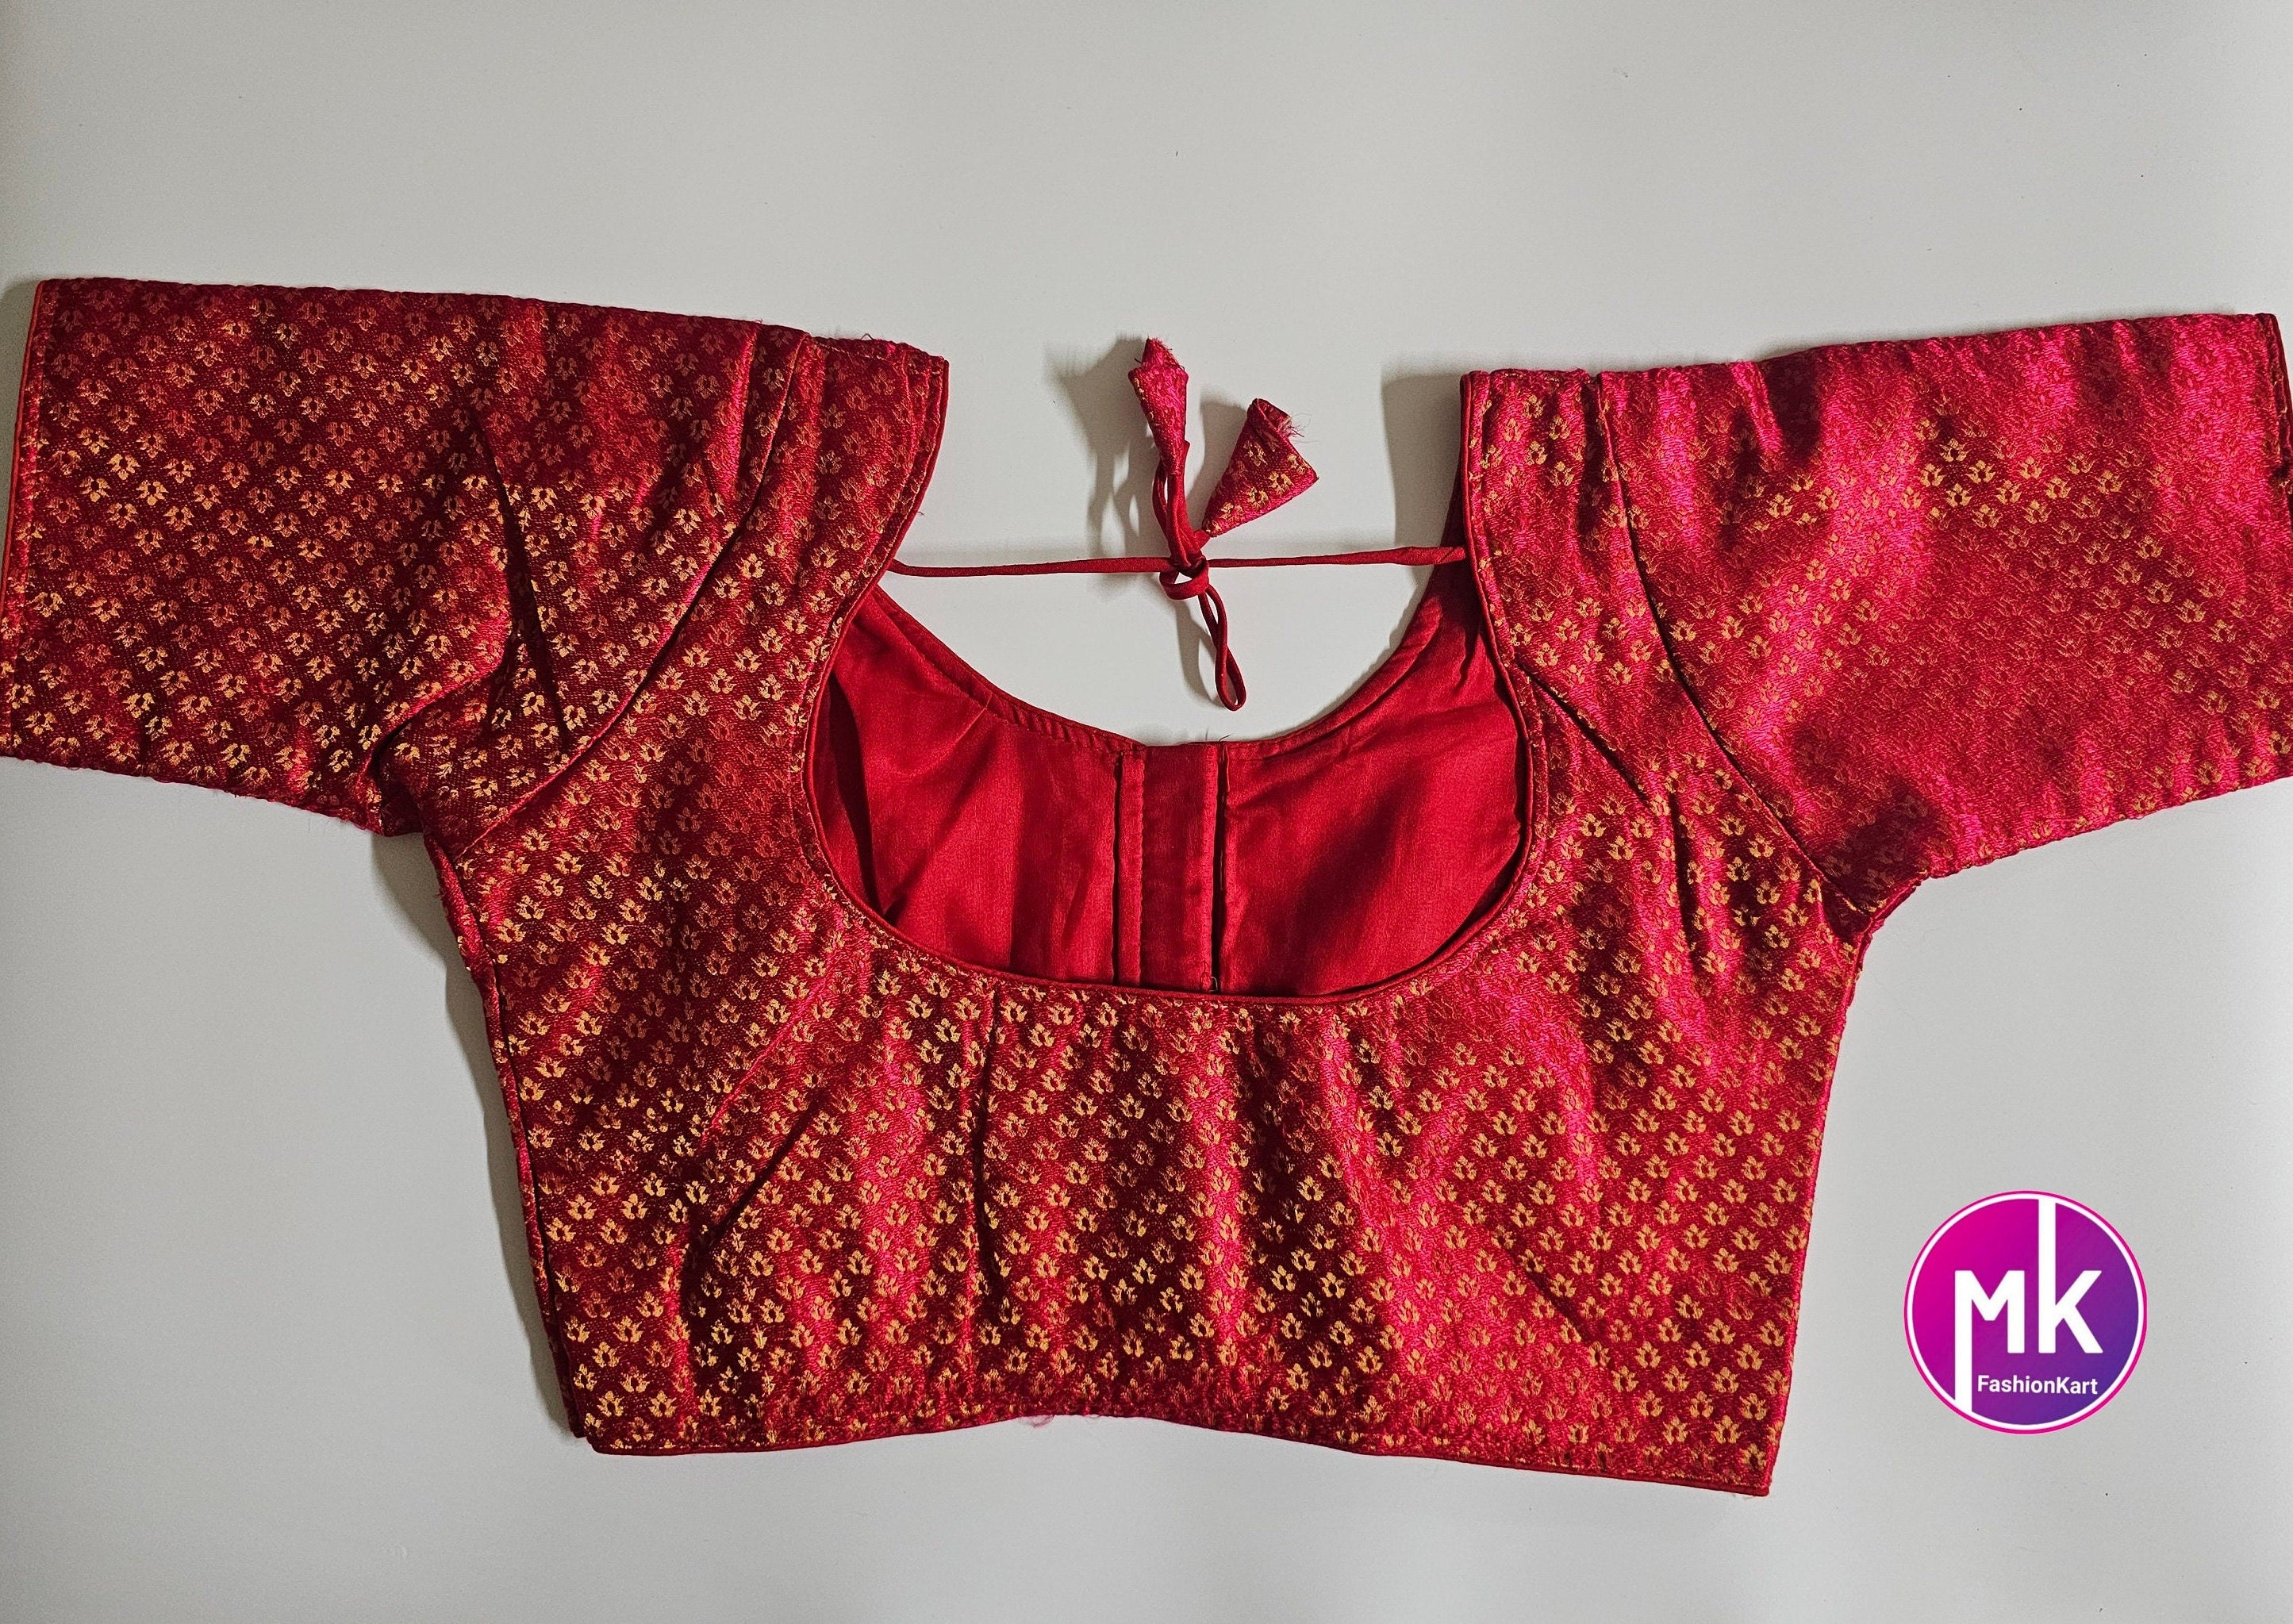 Readymade Saree Blouse - Red Color with golden design Blouse - Princess cut Blouse - Size 40"